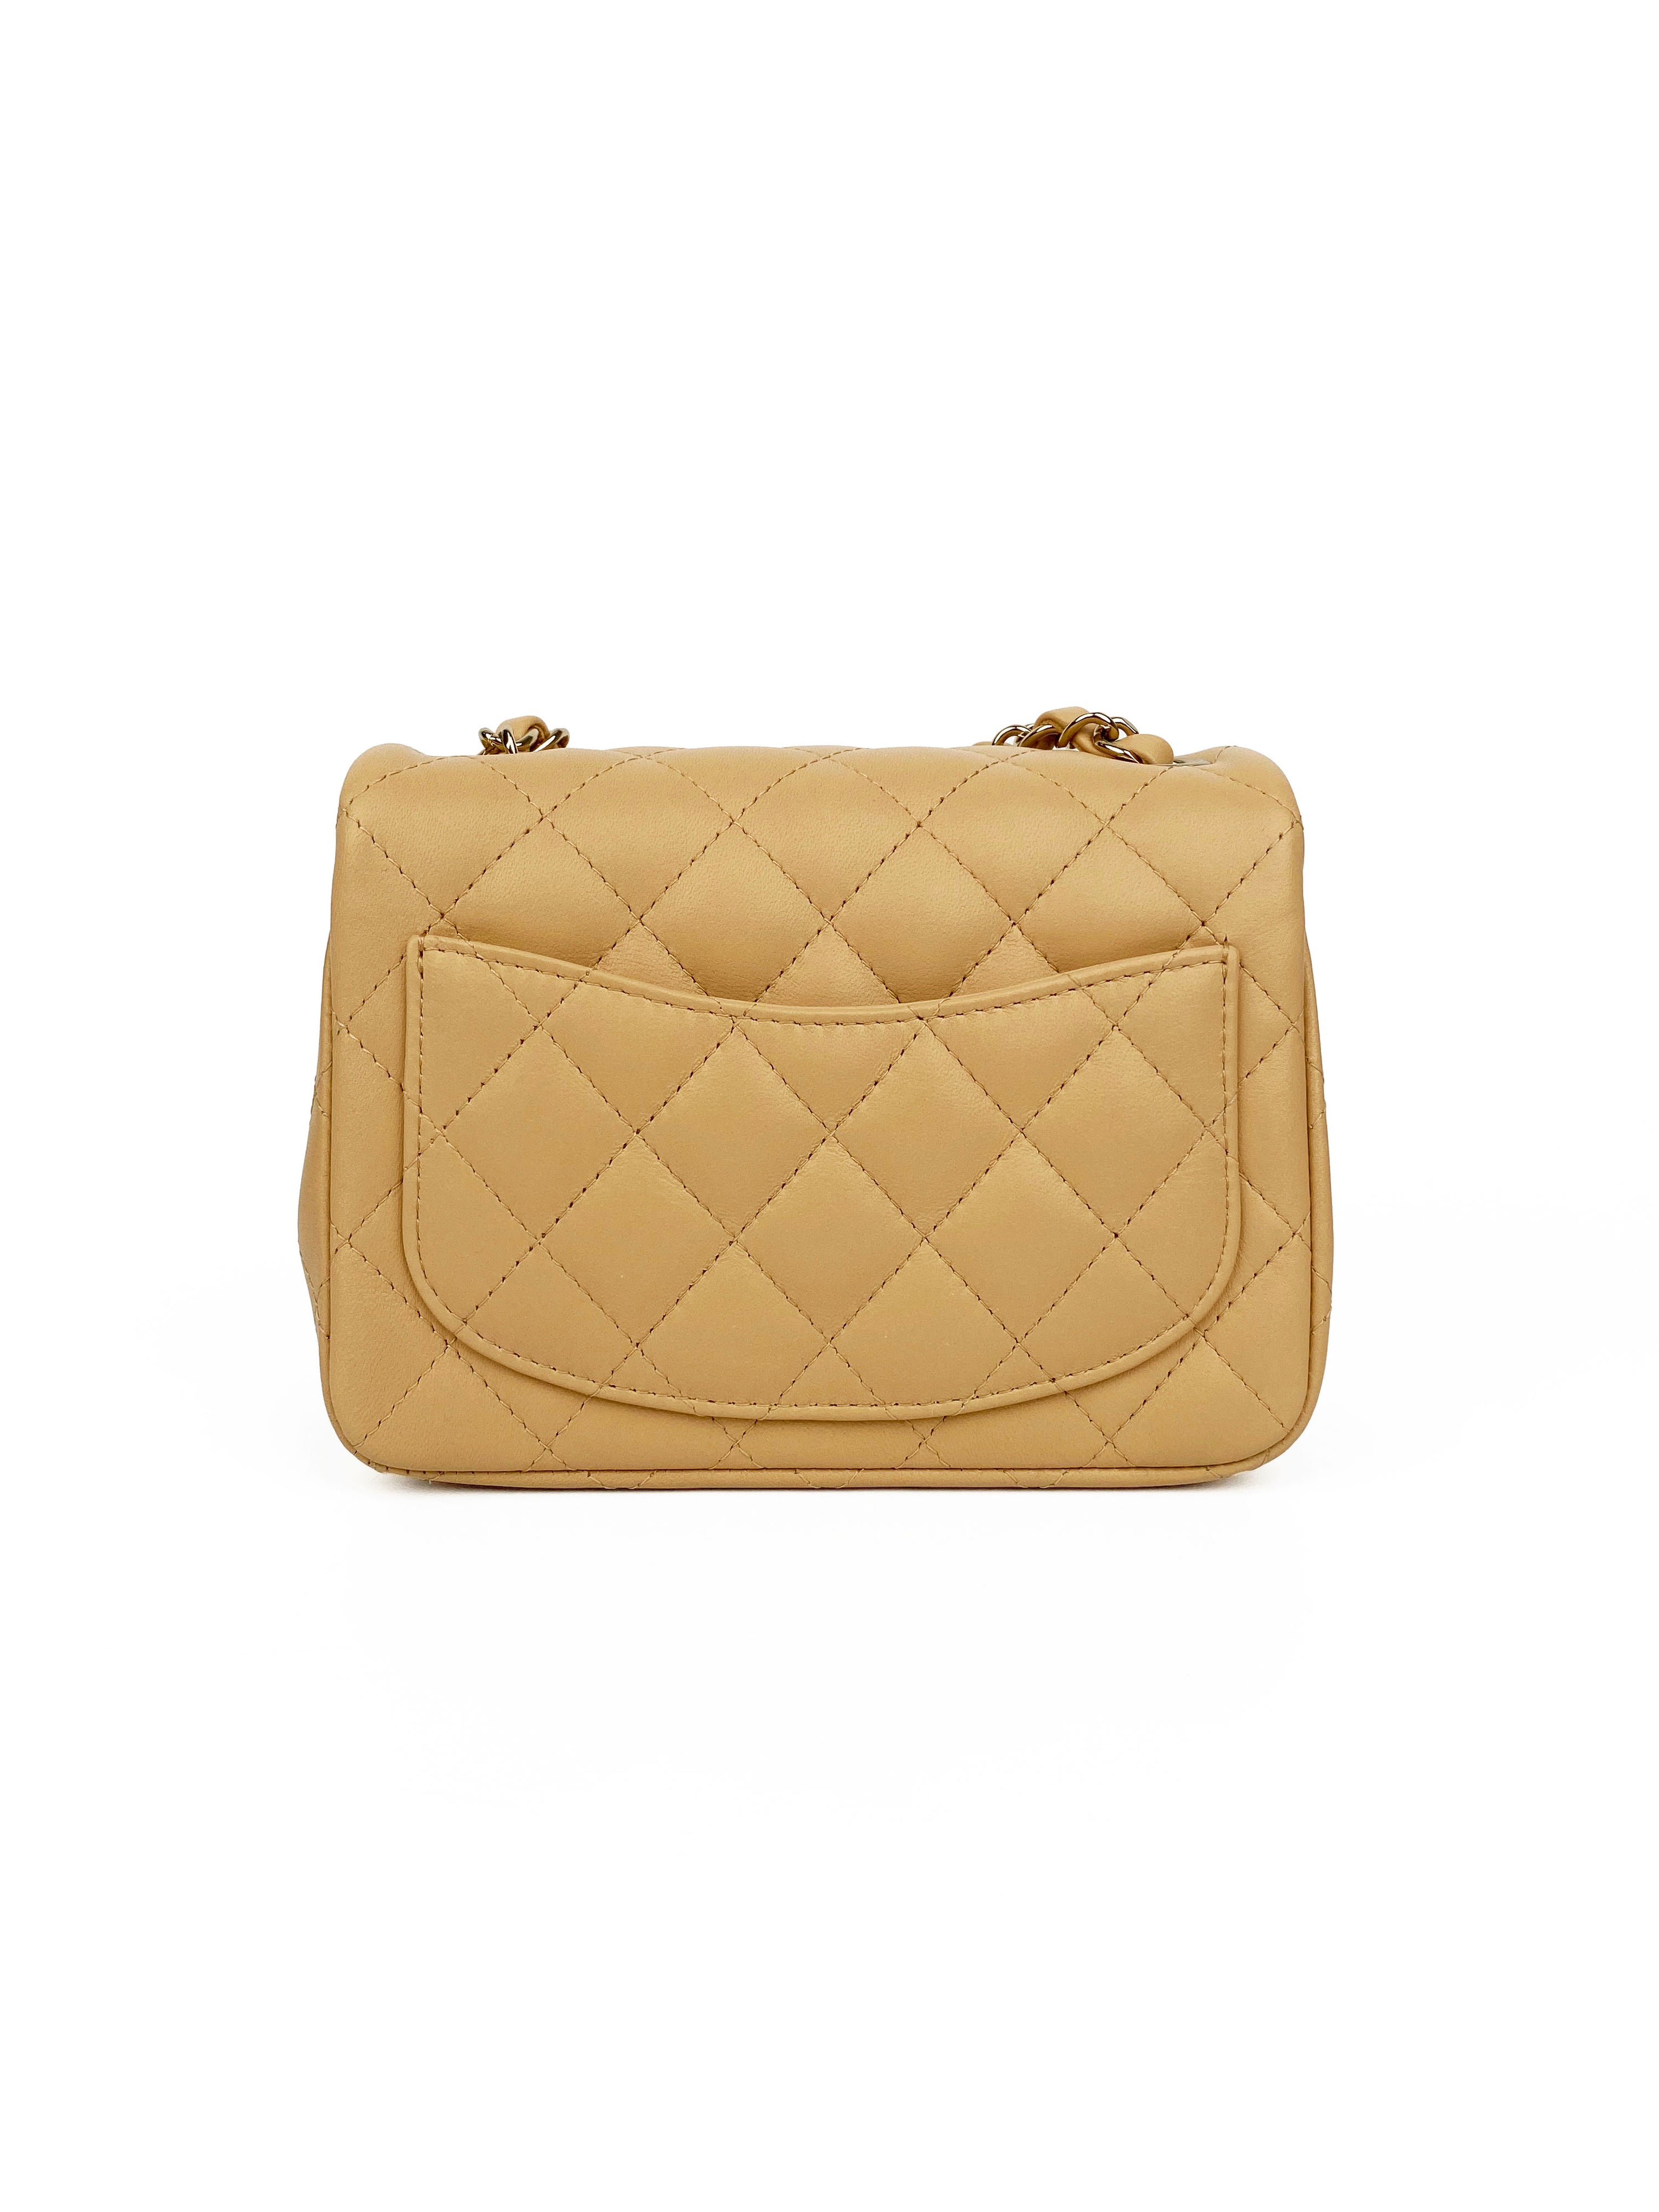 Chanel Small Square Nude Flap Bag